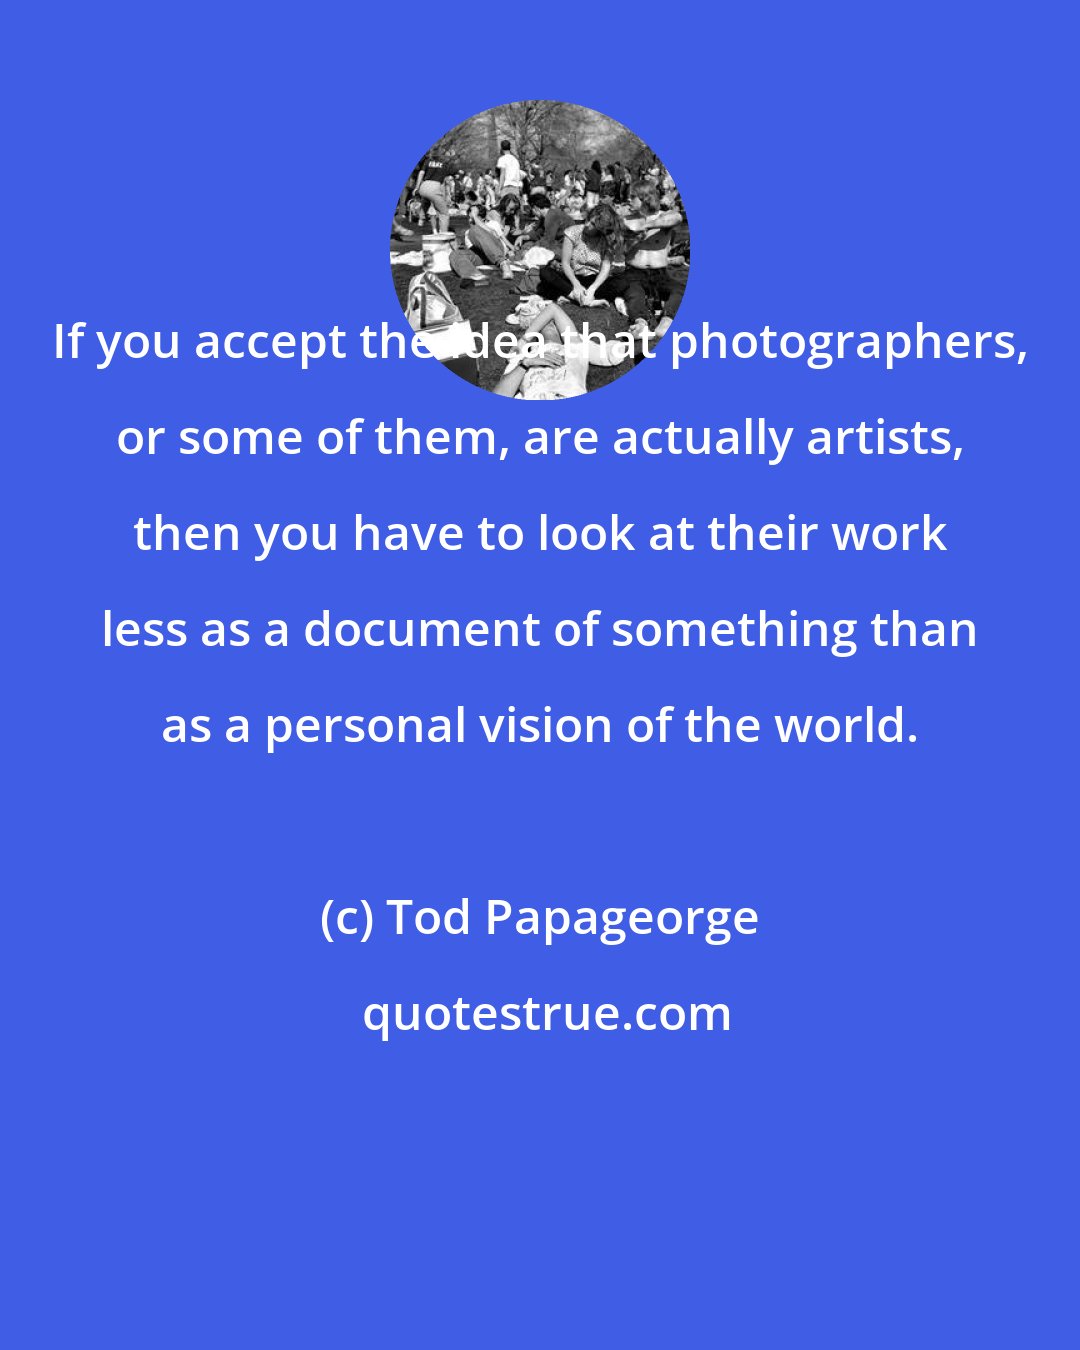 Tod Papageorge: If you accept the idea that photographers, or some of them, are actually artists, then you have to look at their work less as a document of something than as a personal vision of the world.